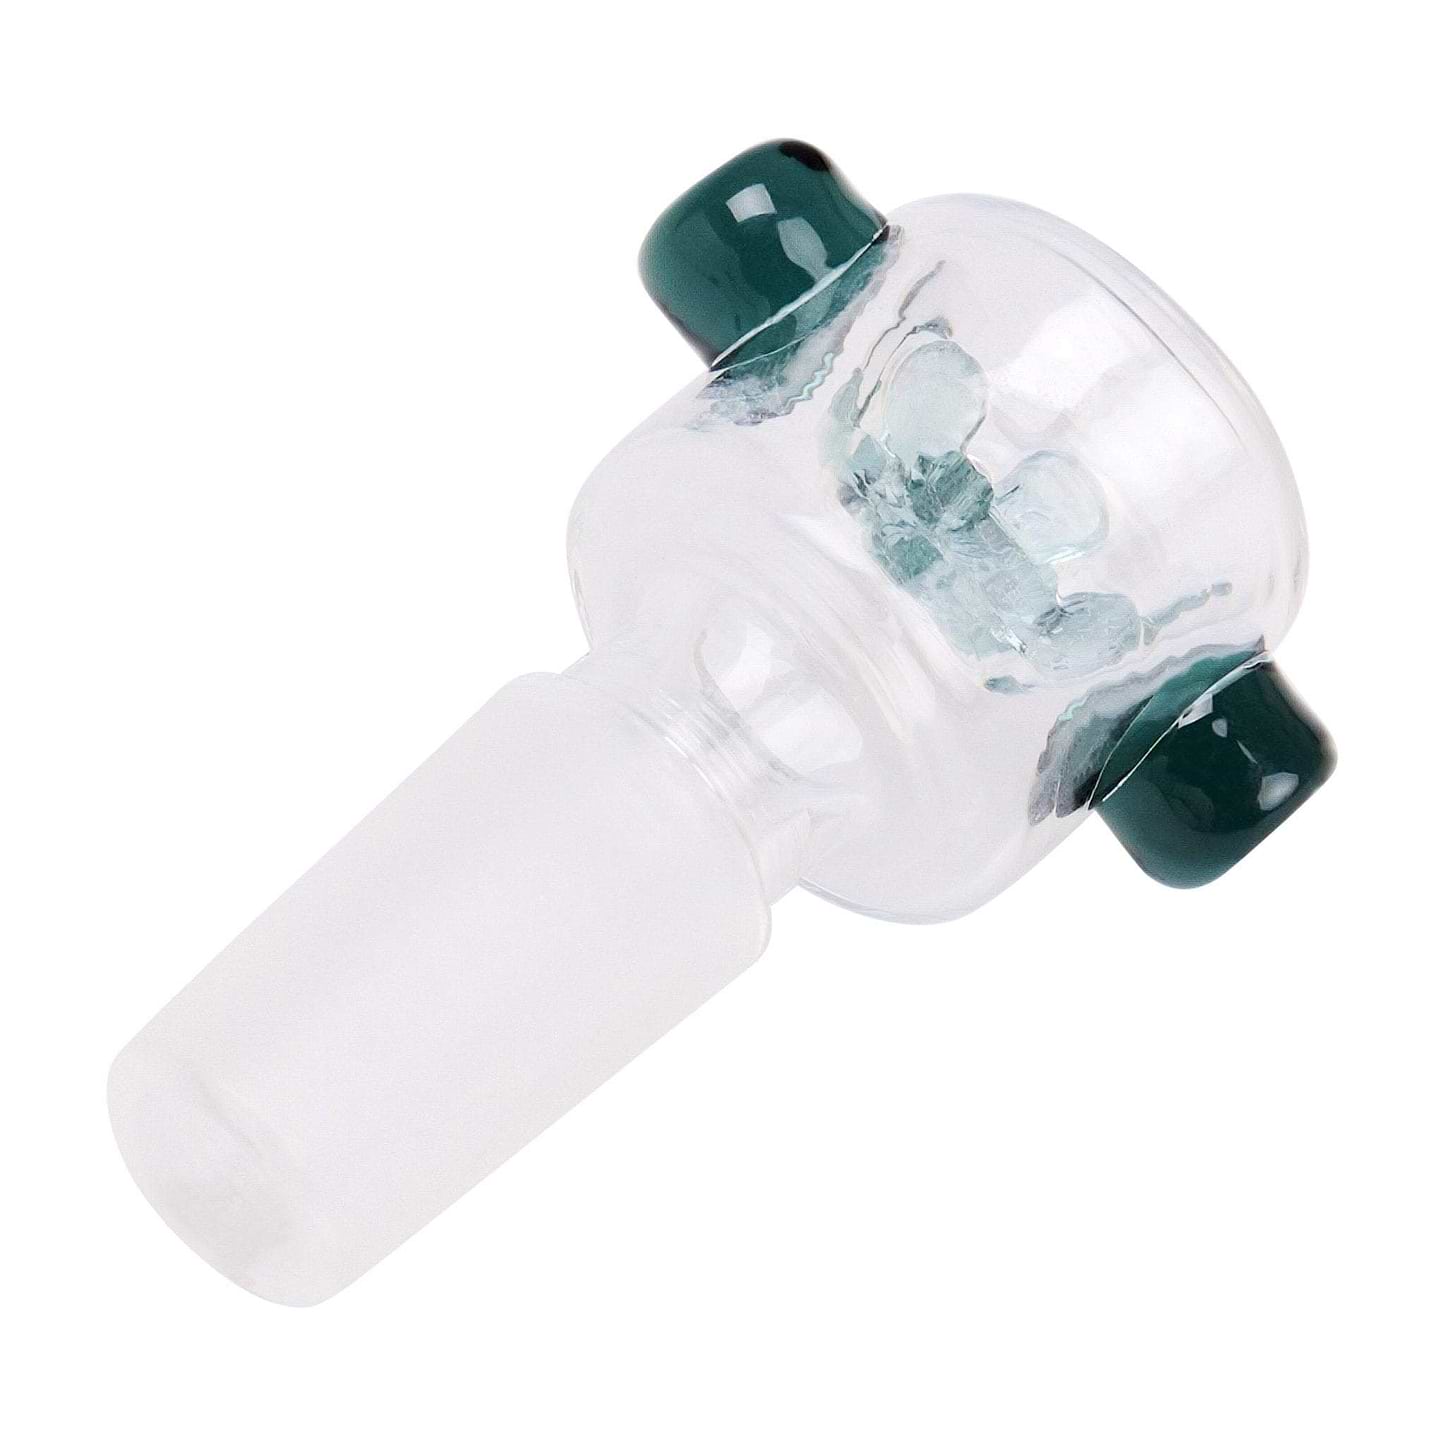 right tilted 14mm glass male bowl for bong smoking accessory with built-in screen and teal finger grips on the sides